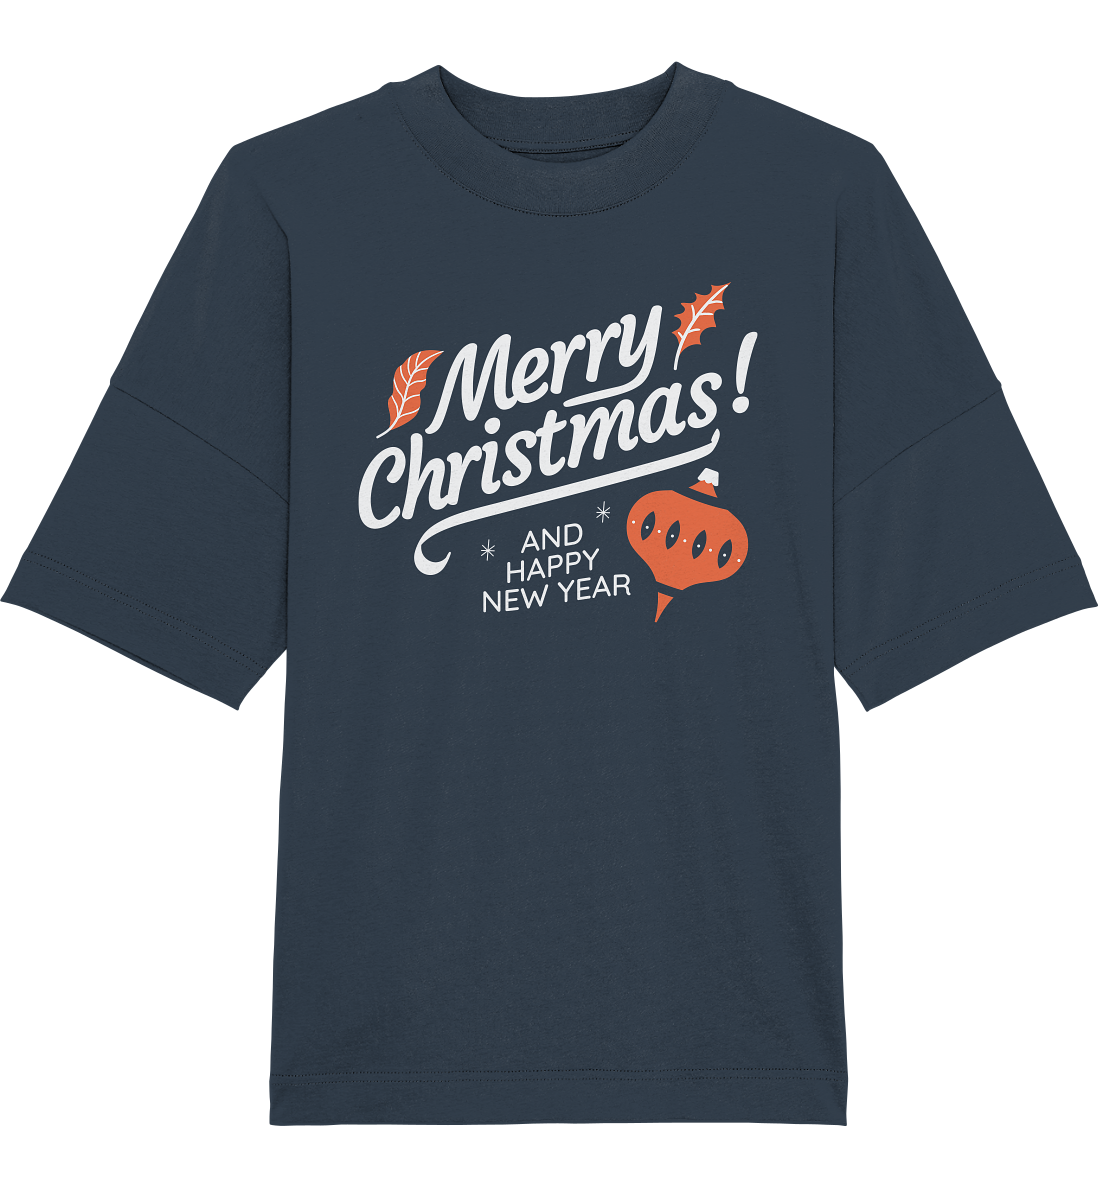 Merry Christmas and a Happy New Year, Merry Christmas and Happy New Year - Organic Oversize Shirt